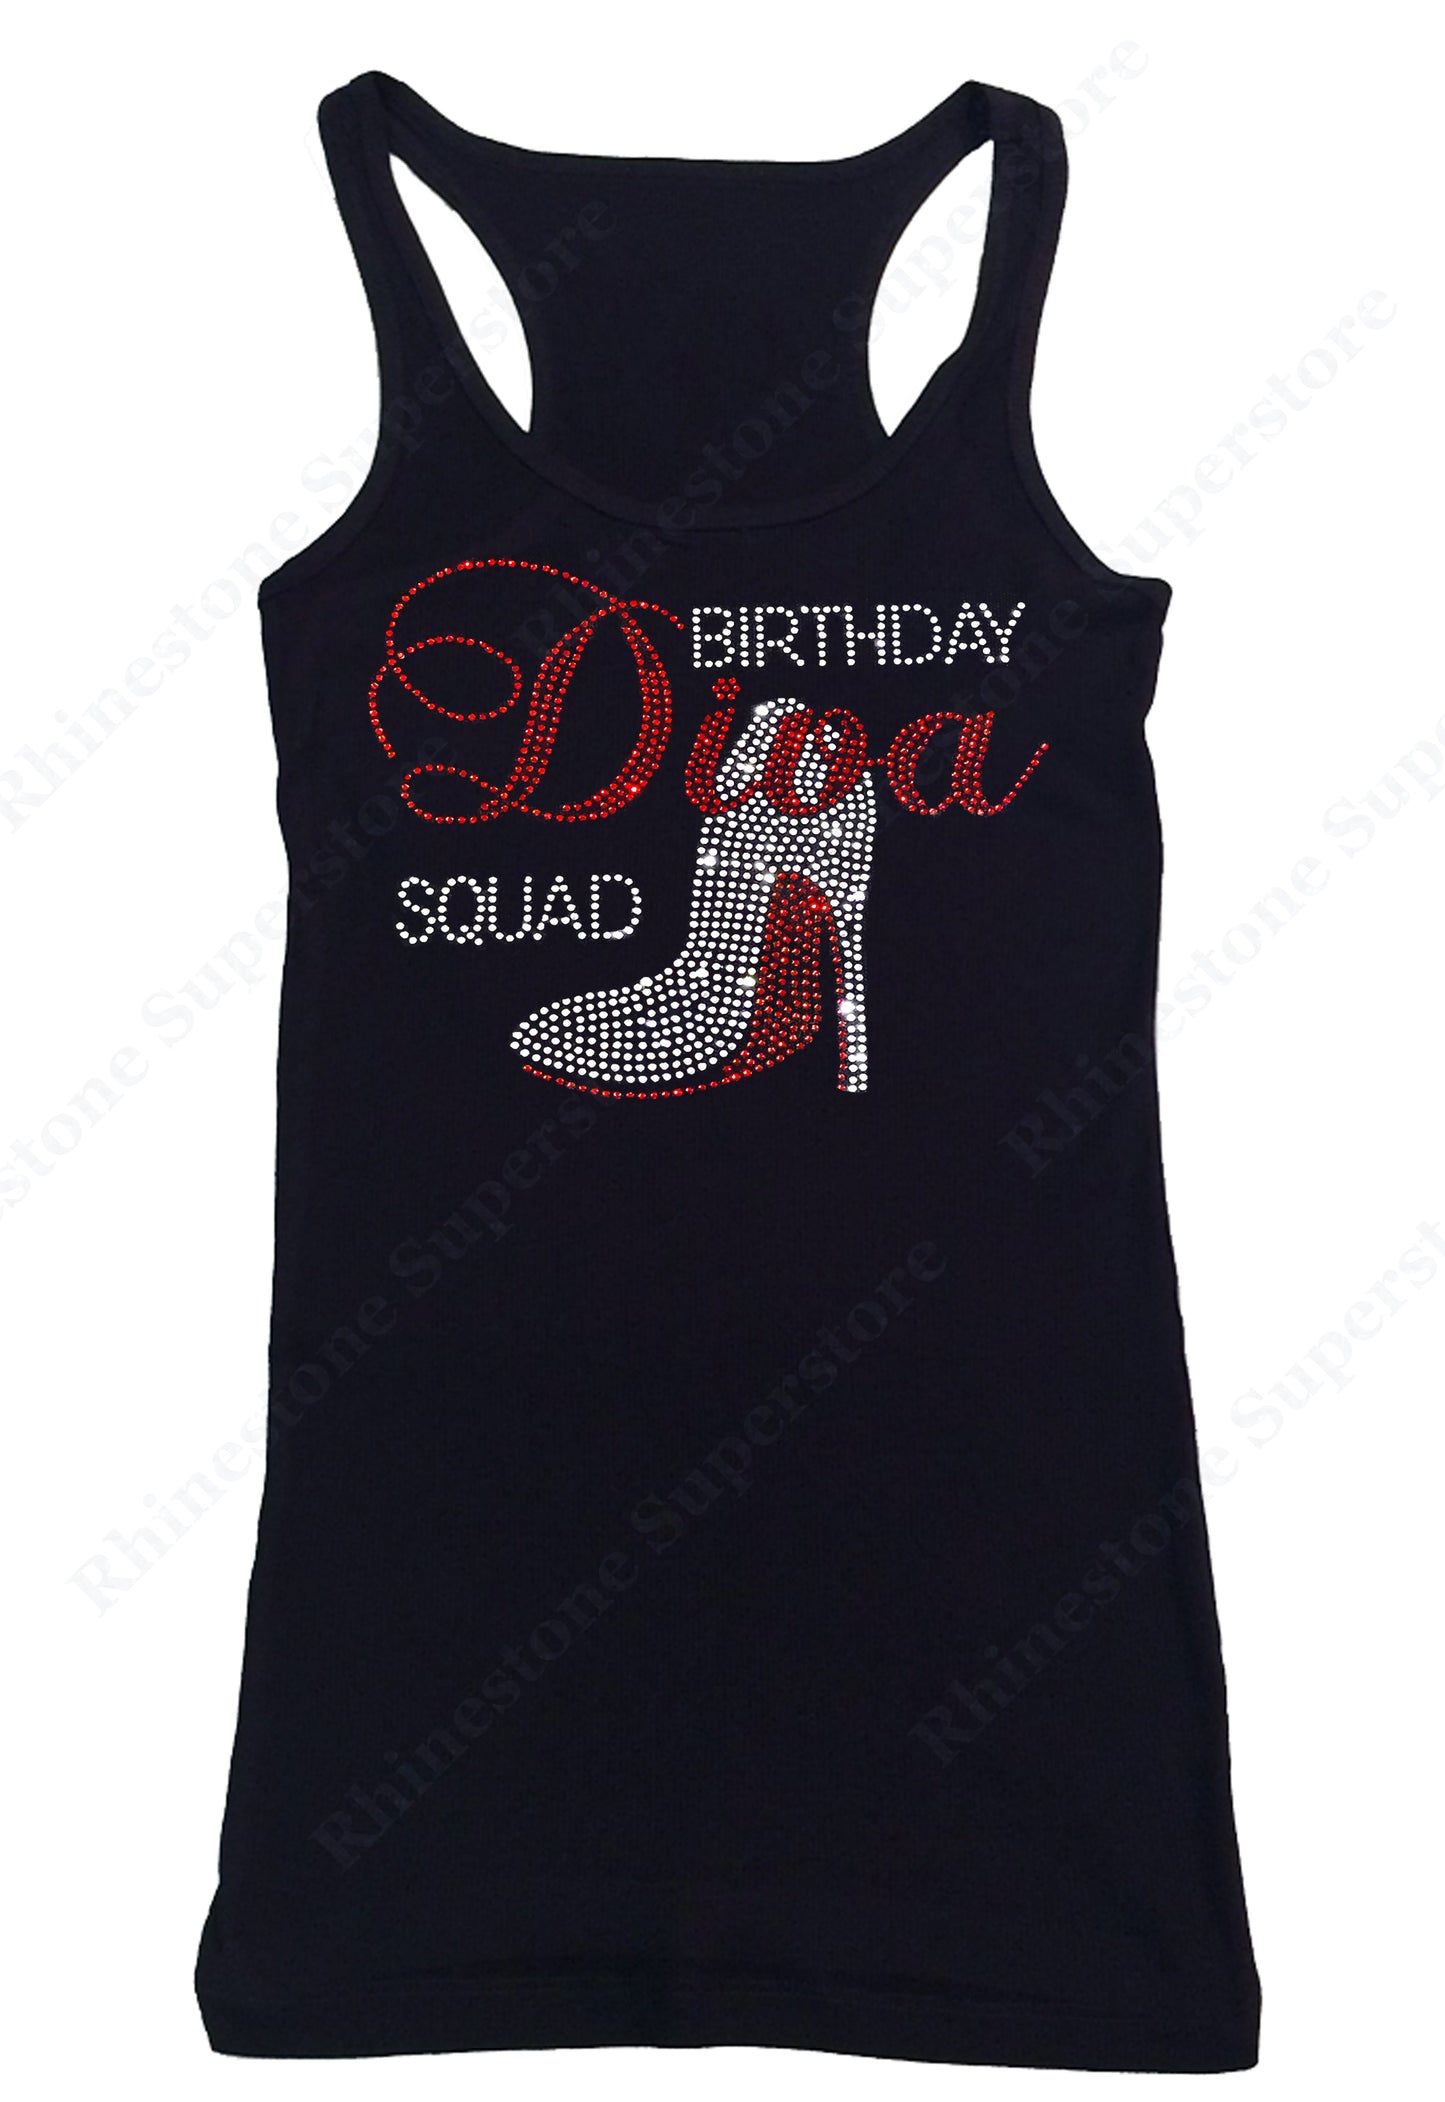 Womens T-shirt with Birthday Diva Squad with Heel in Rhinestones